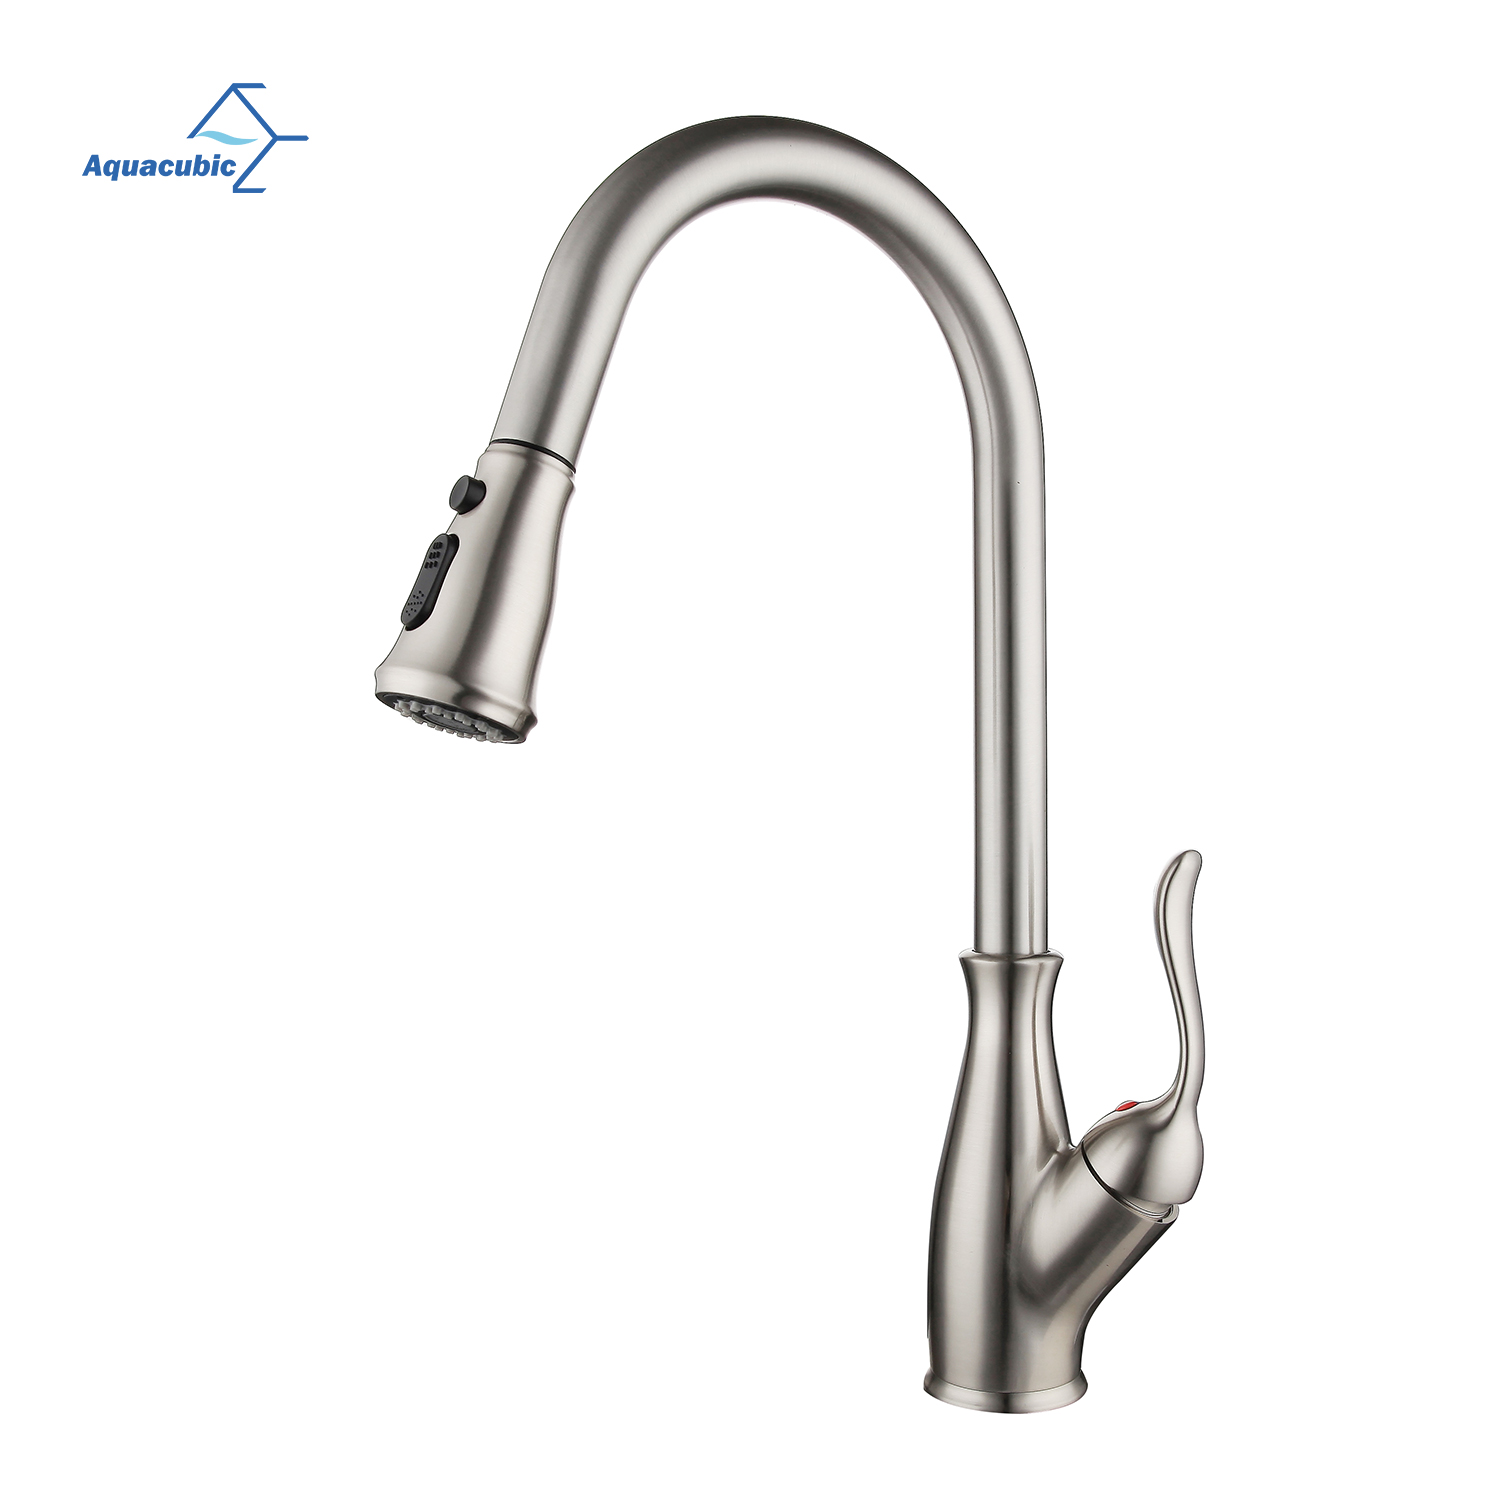  Aquacubic low lead cUPC Sanitary Contemporary Universal Pull Out Kitchen Faucet